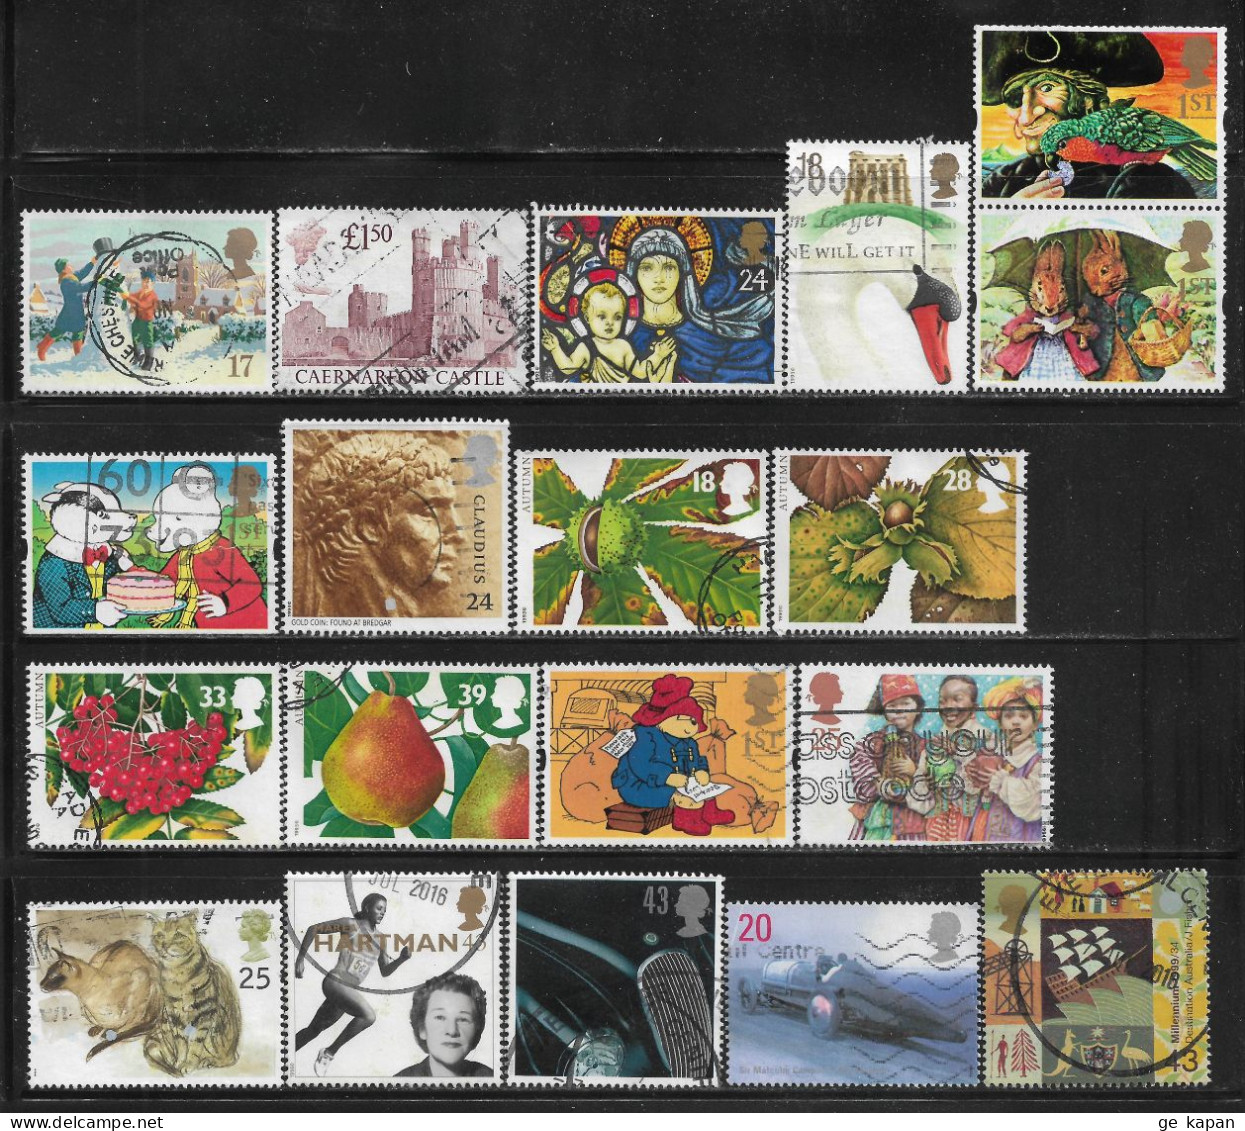 1990-1999 GREAT BRITAIN Lot Of 19 USED STAMPS CV $16.55 - Oblitérés